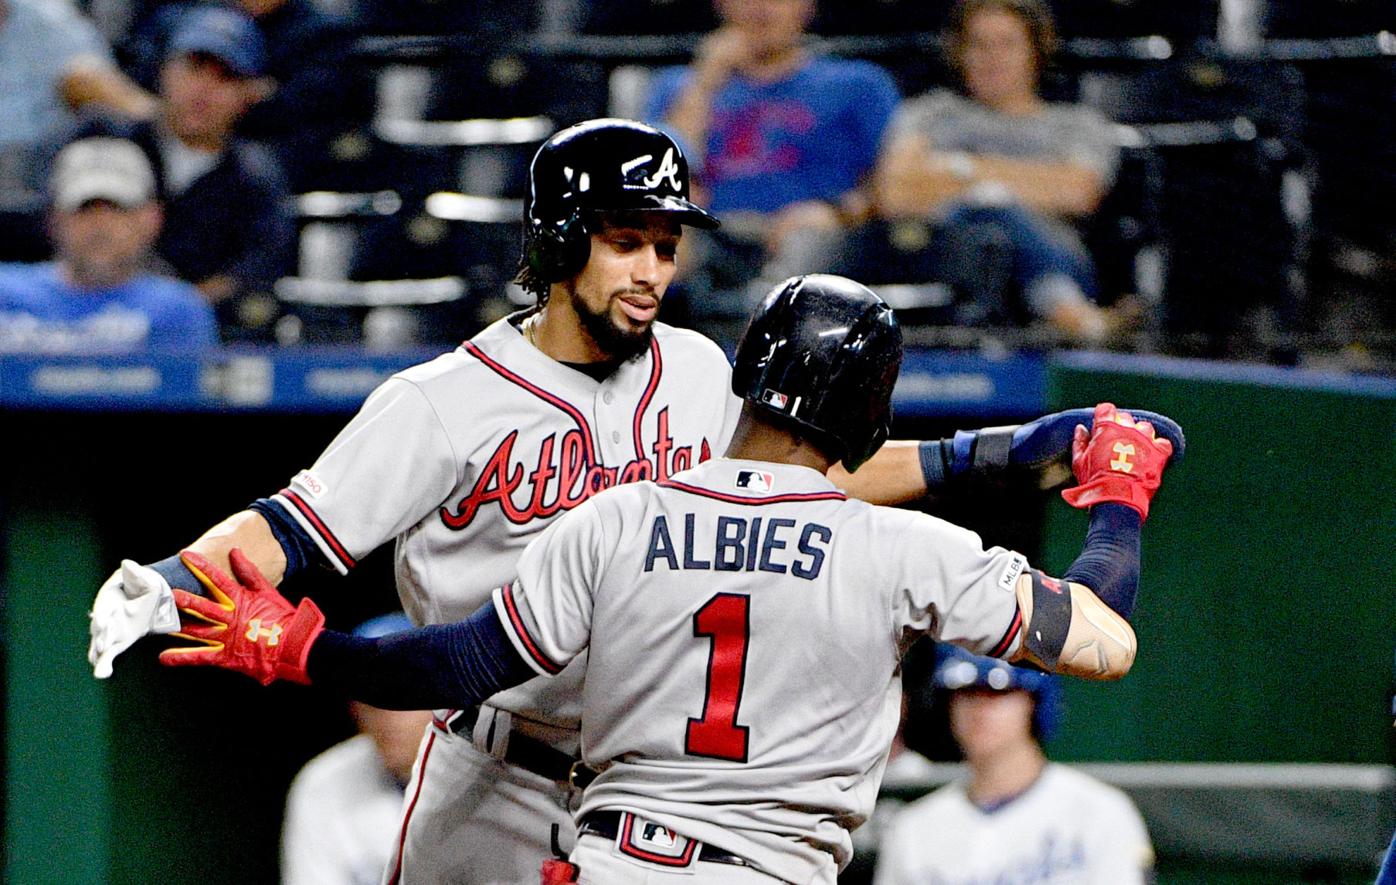 Donaldson, Albies homer again, Braves win 9th straight